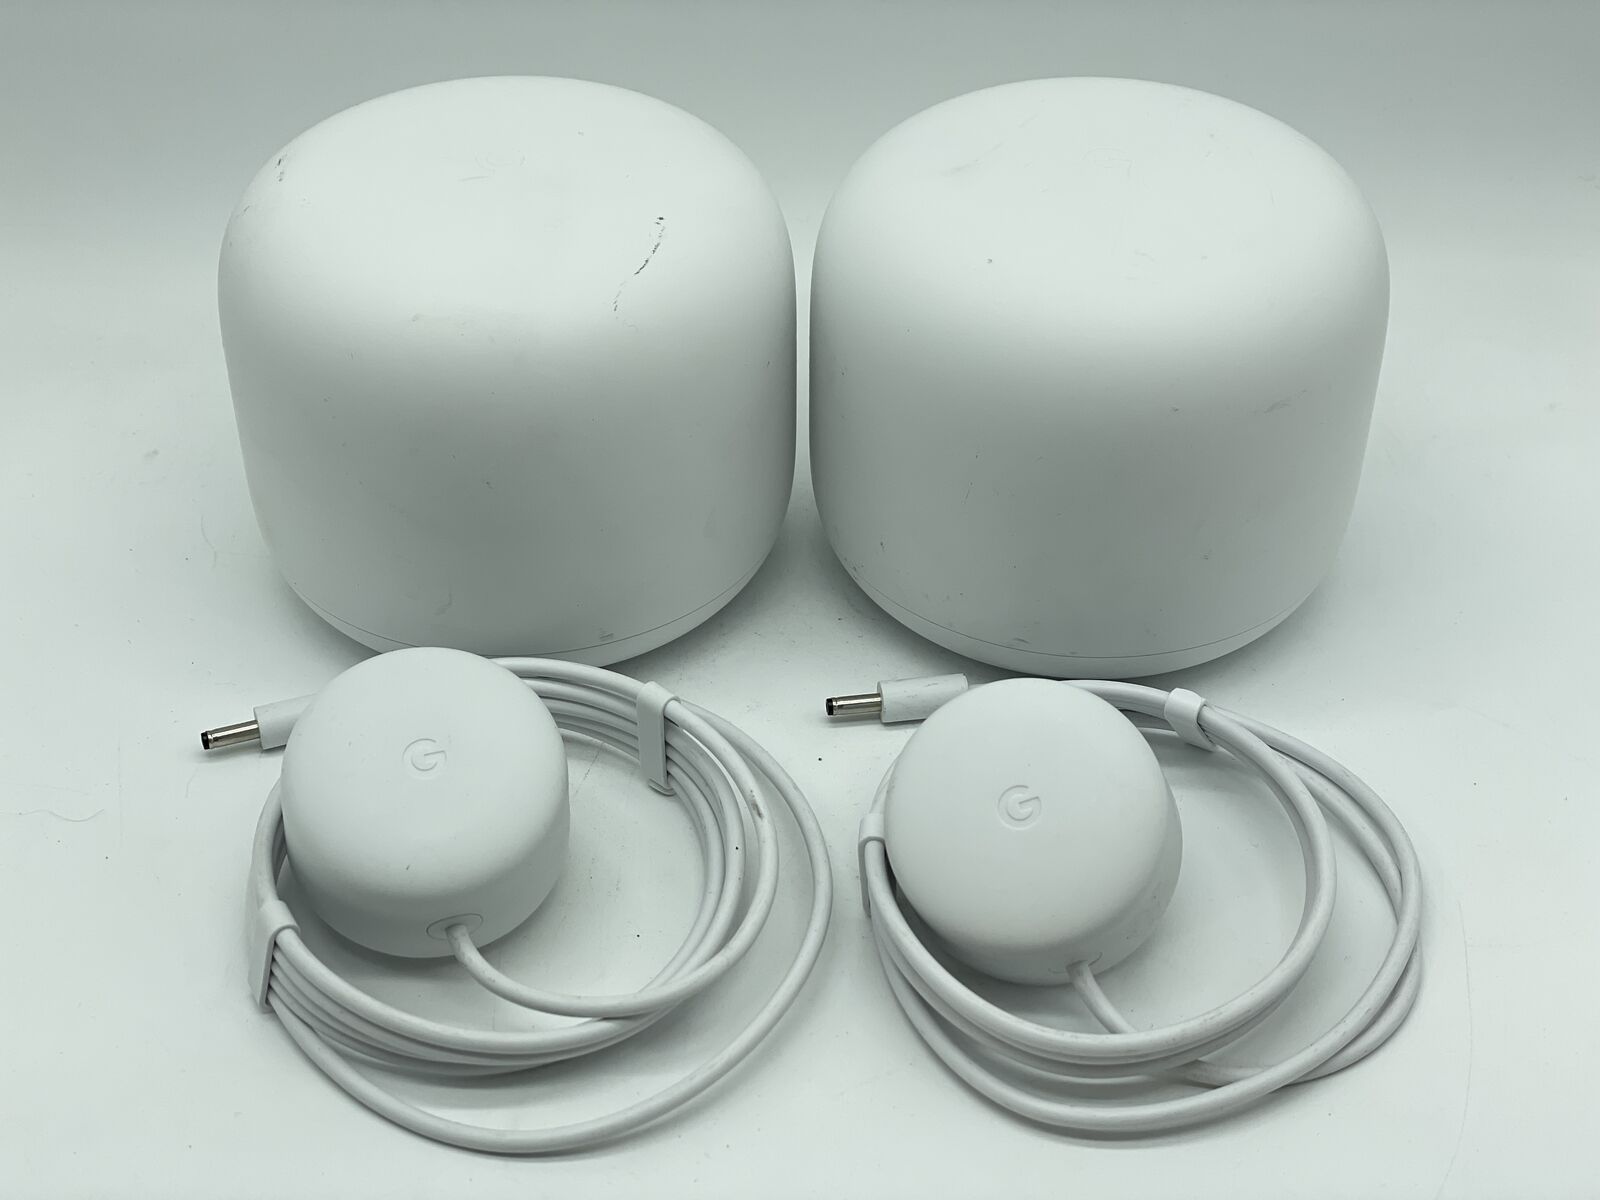 Google H2D Nest Wi-Fi Router w/ Power Cables Snow Lot of 2 Used